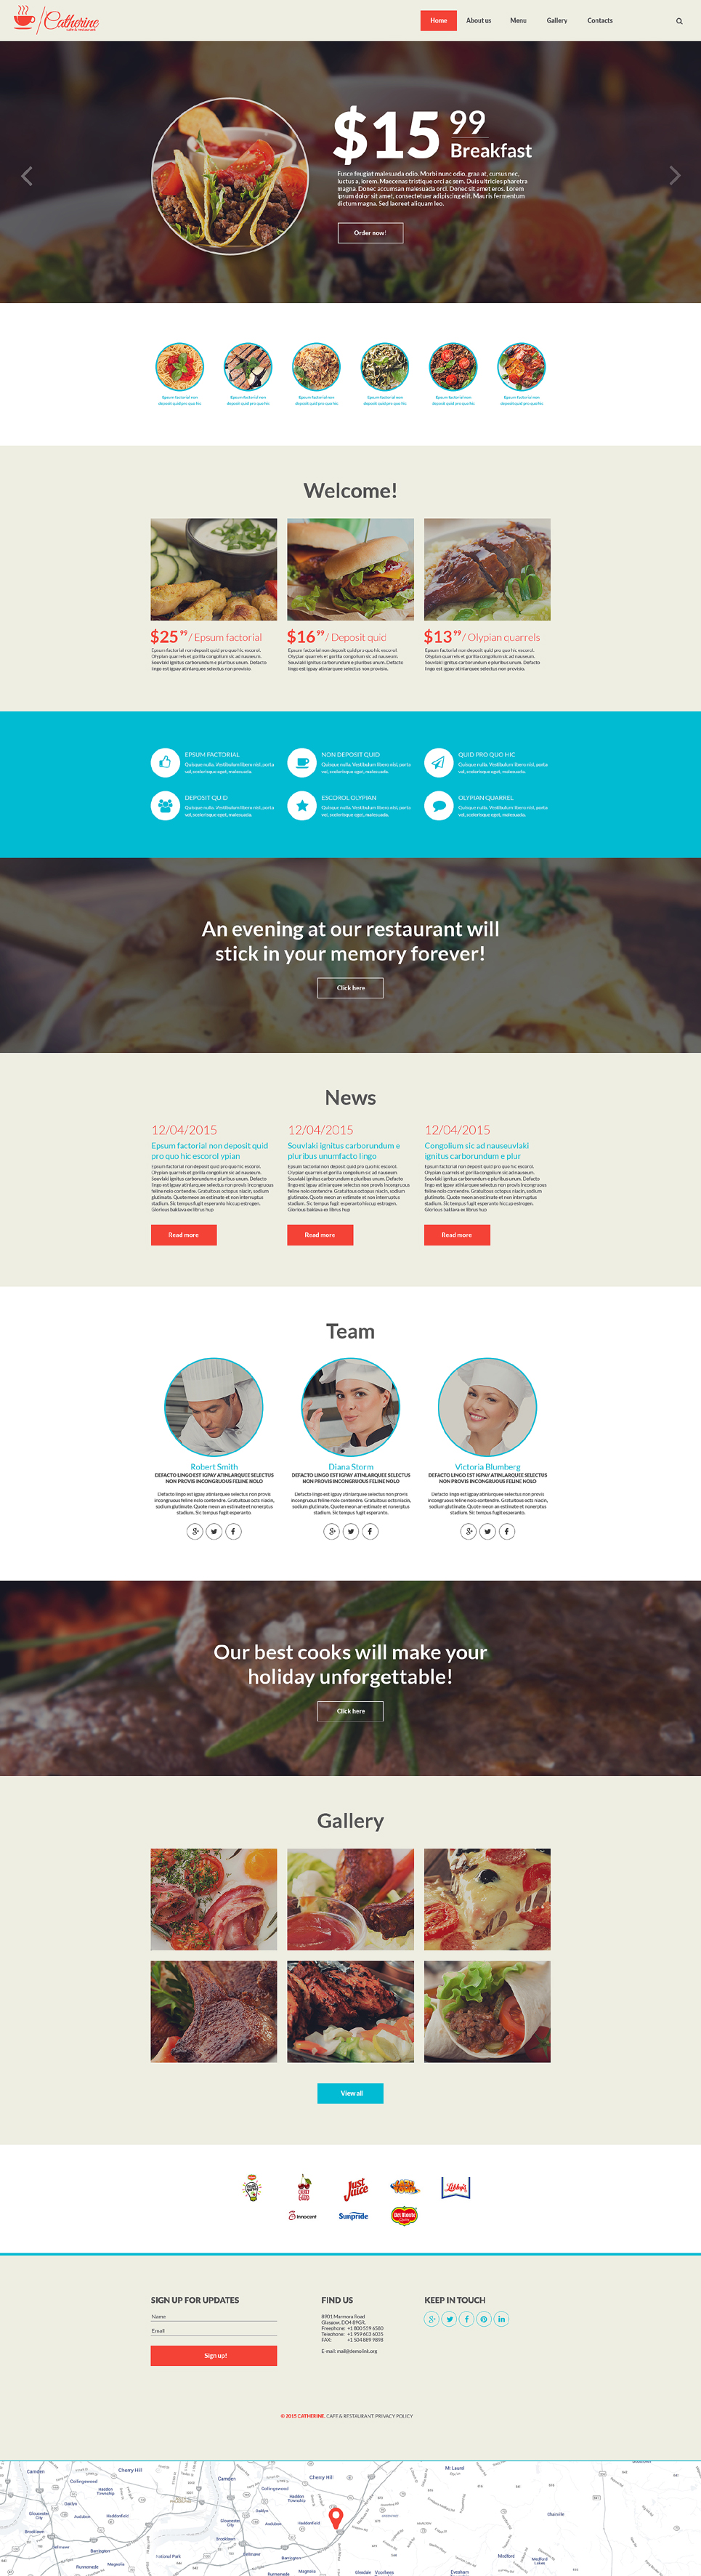 cafe-and-restaurant-responsive-website-template-55980